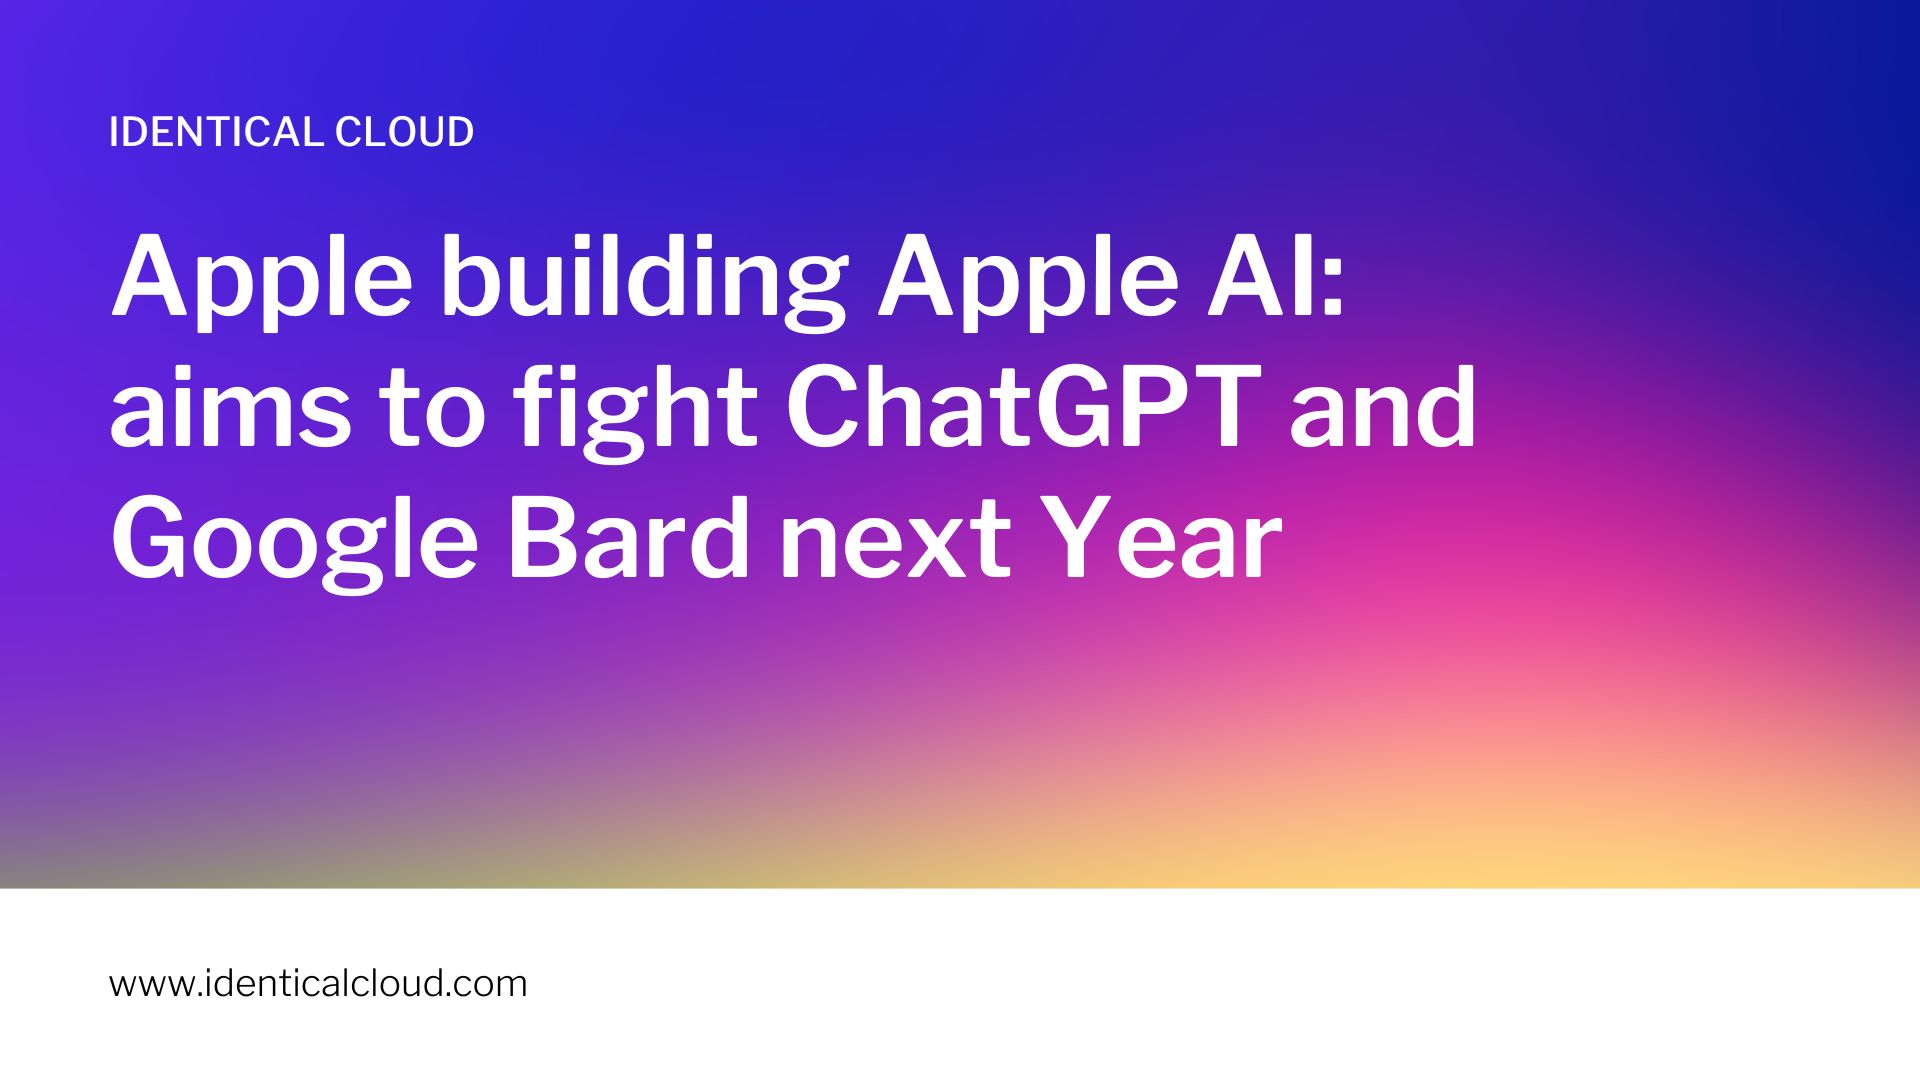 Apple building Apple AI: aims to fight ChatGPT and Google Bard next Year - identicalcloud.com